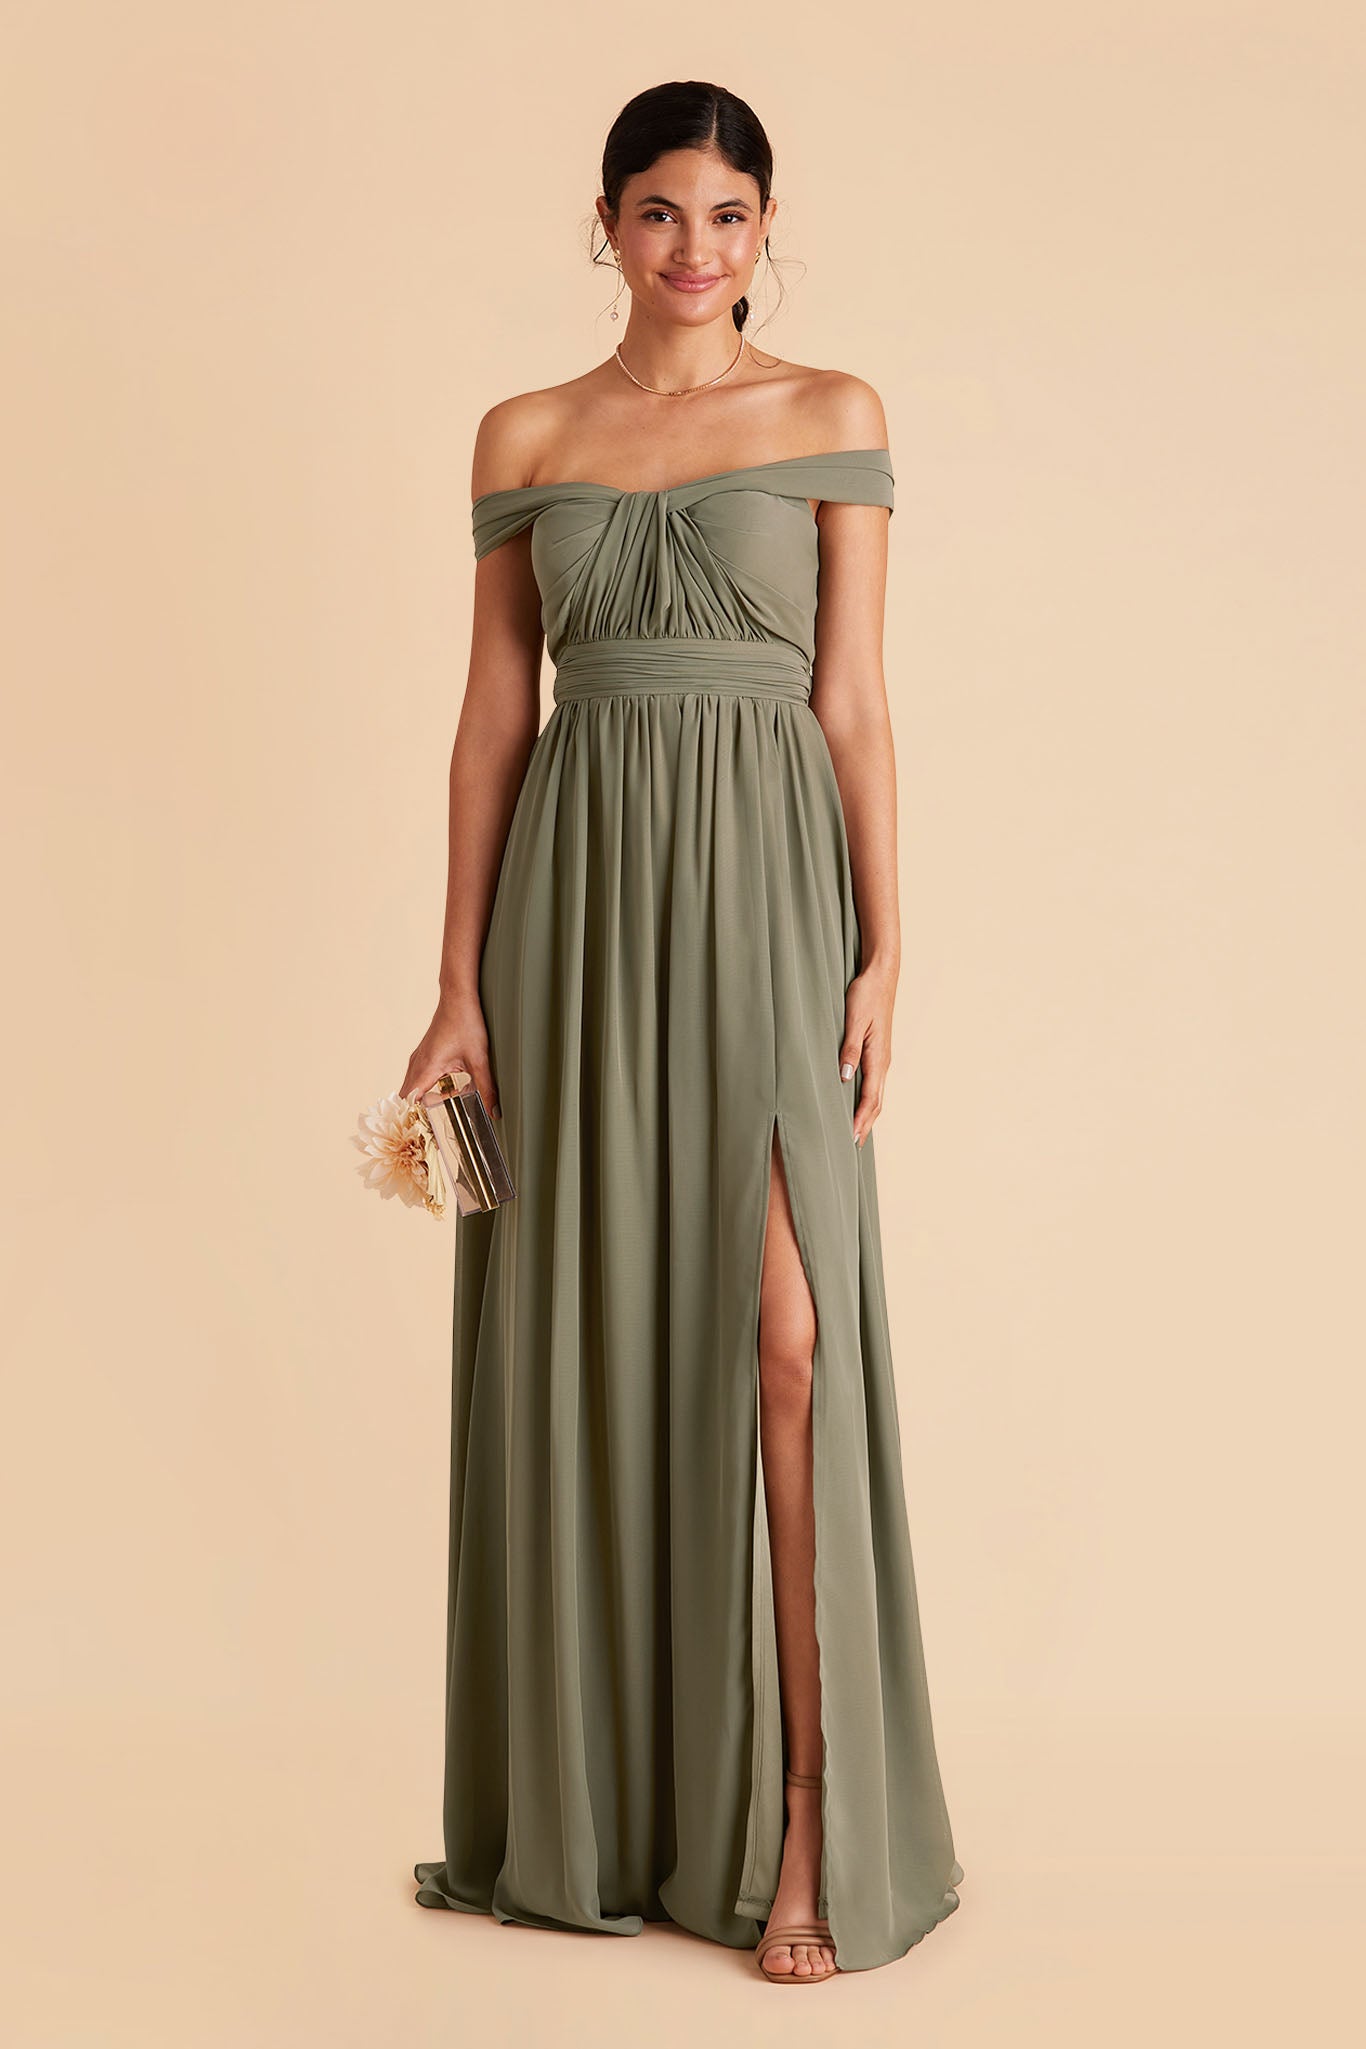 Grace convertible bridesmaid dress in Moss Green Chiffon by Birdy Grey, front view